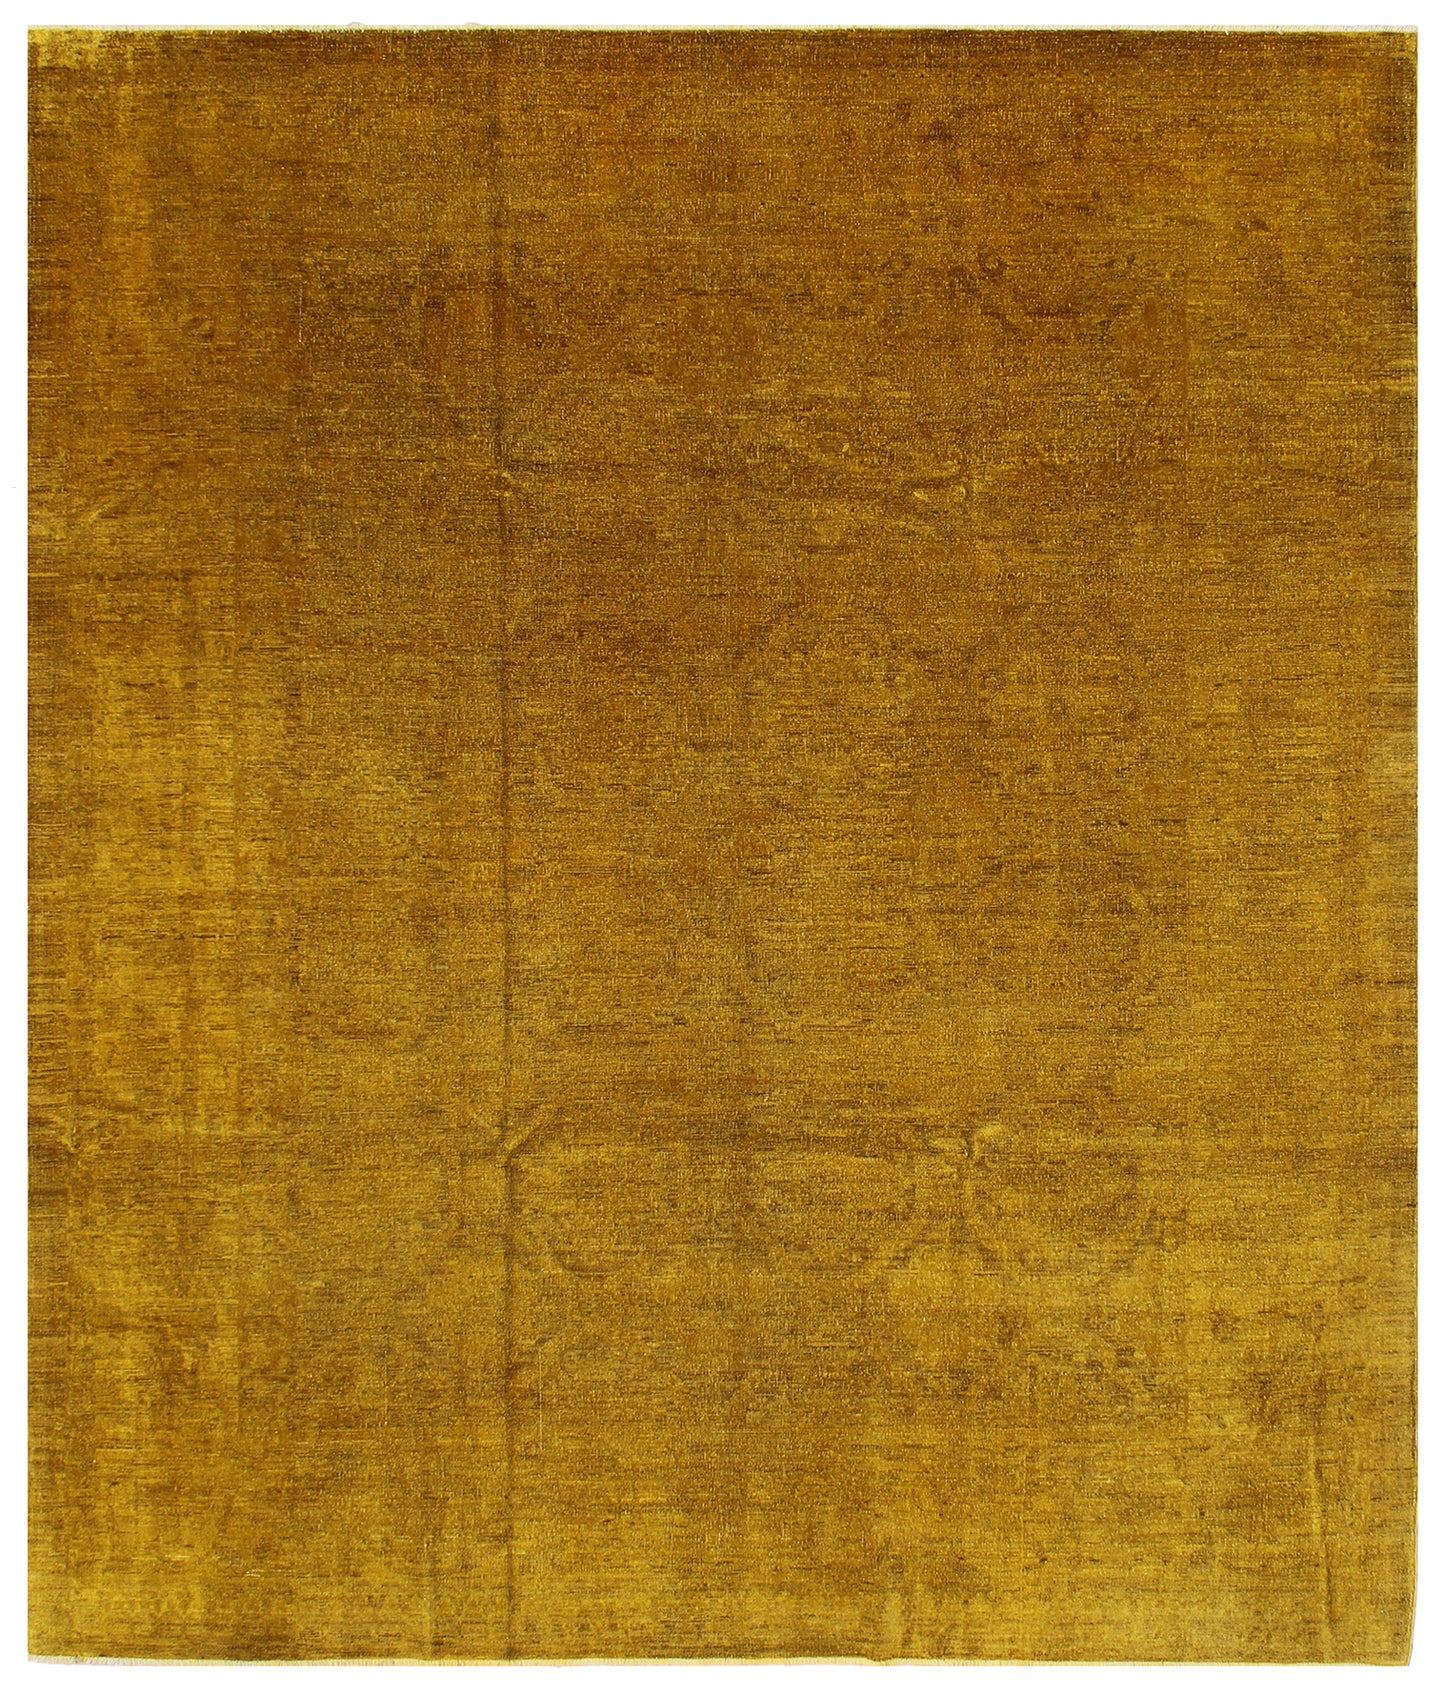 8'x10' Pale Design Gold Color Ariana Over-dye Area Rug